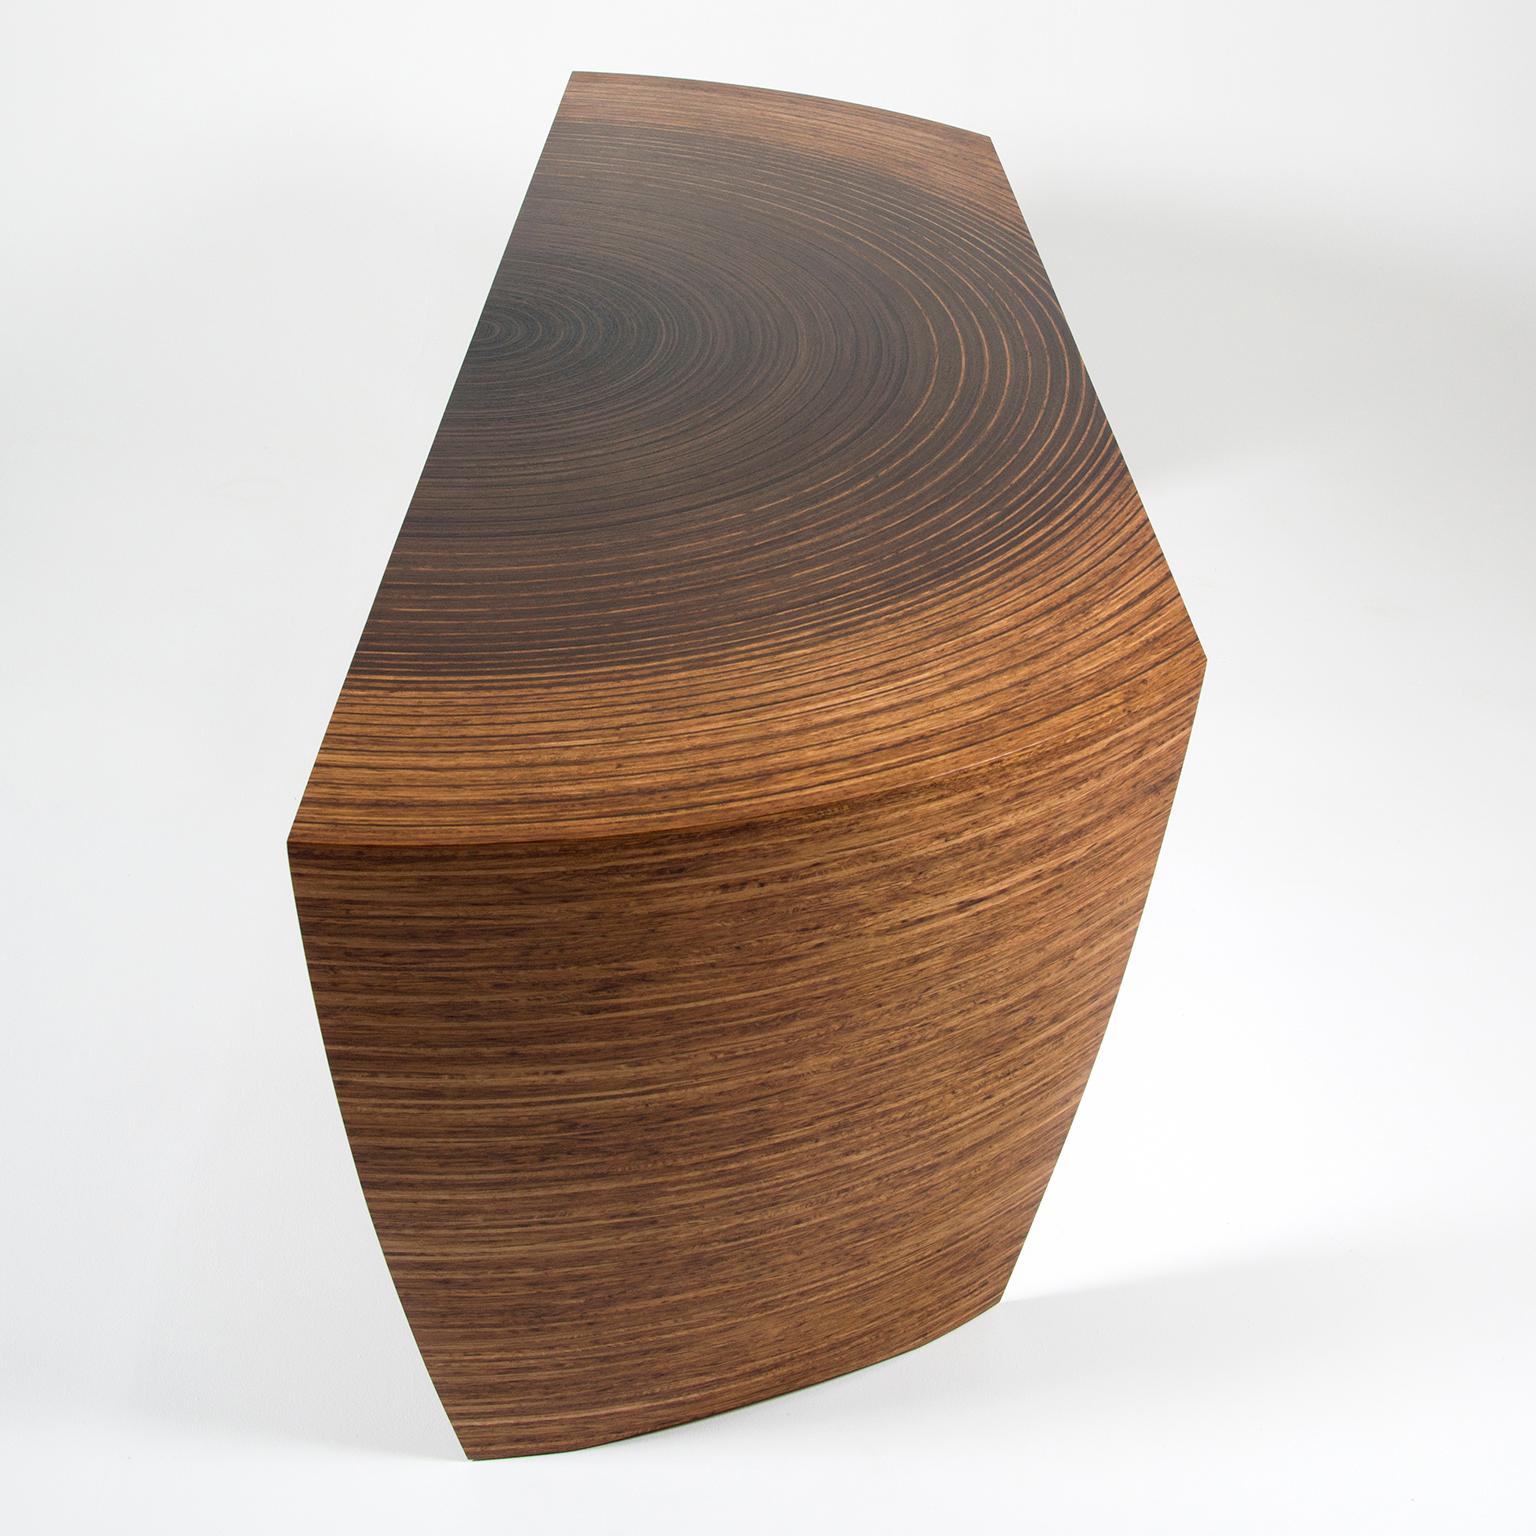 Oiled Contemporary, Curved, Sculptural Desk made in Fumed Oak and Brown Oak For Sale